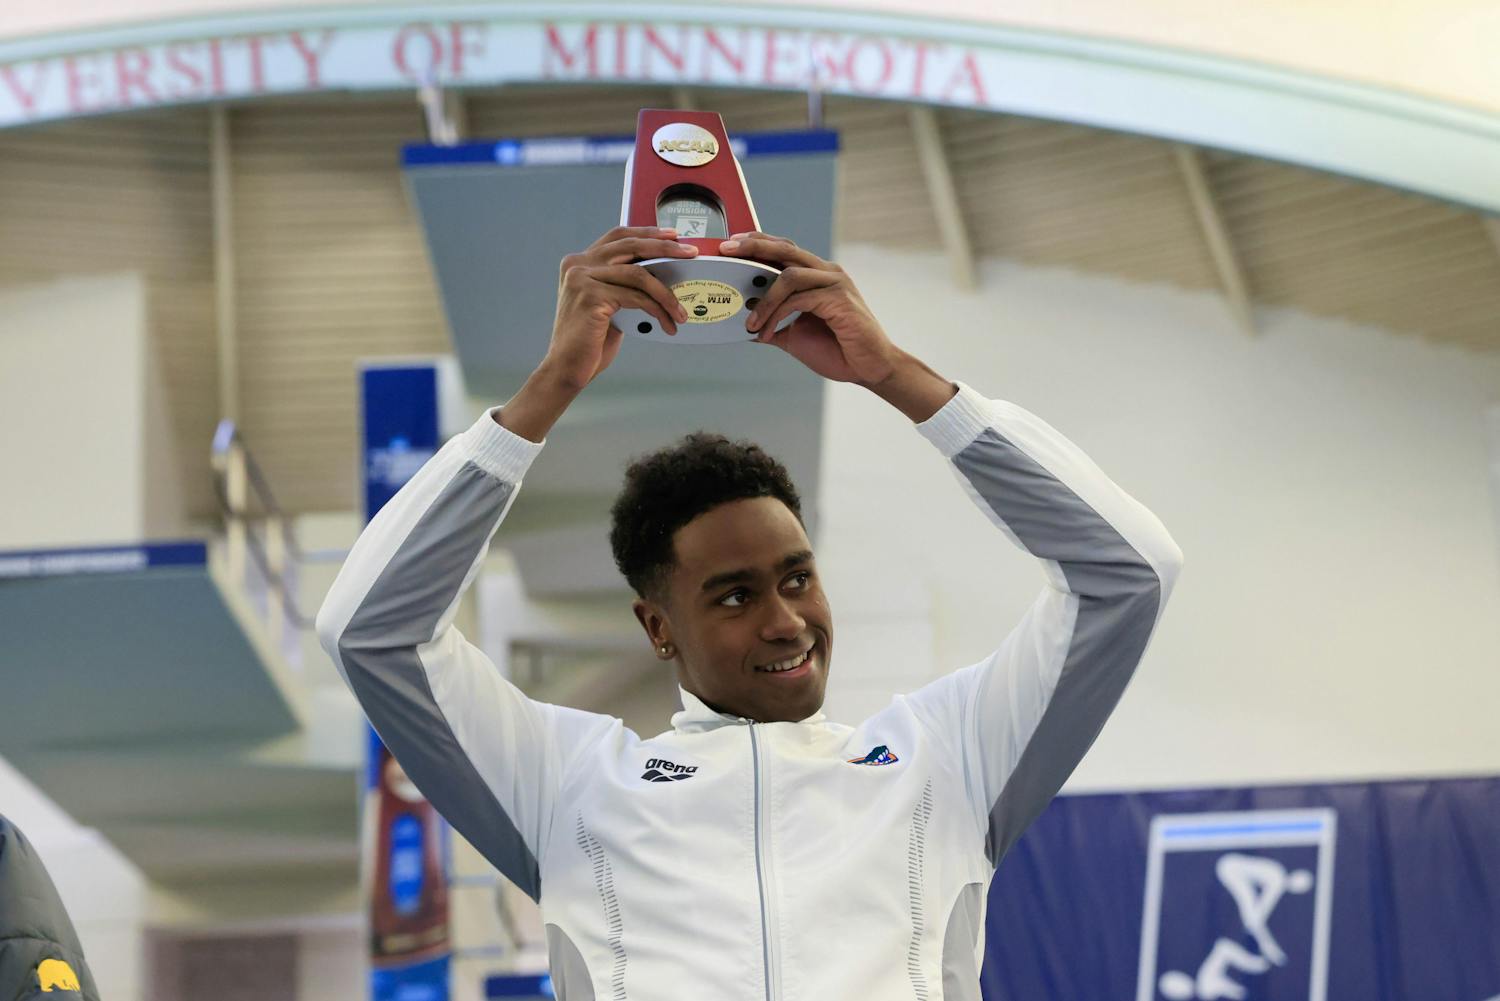 Florida freshman swimmer Joshua Liendo holds an award during the Men's NCAA Championships that took place from Wednesday, March 22, 2023 to Saturday, March 25, 2023.